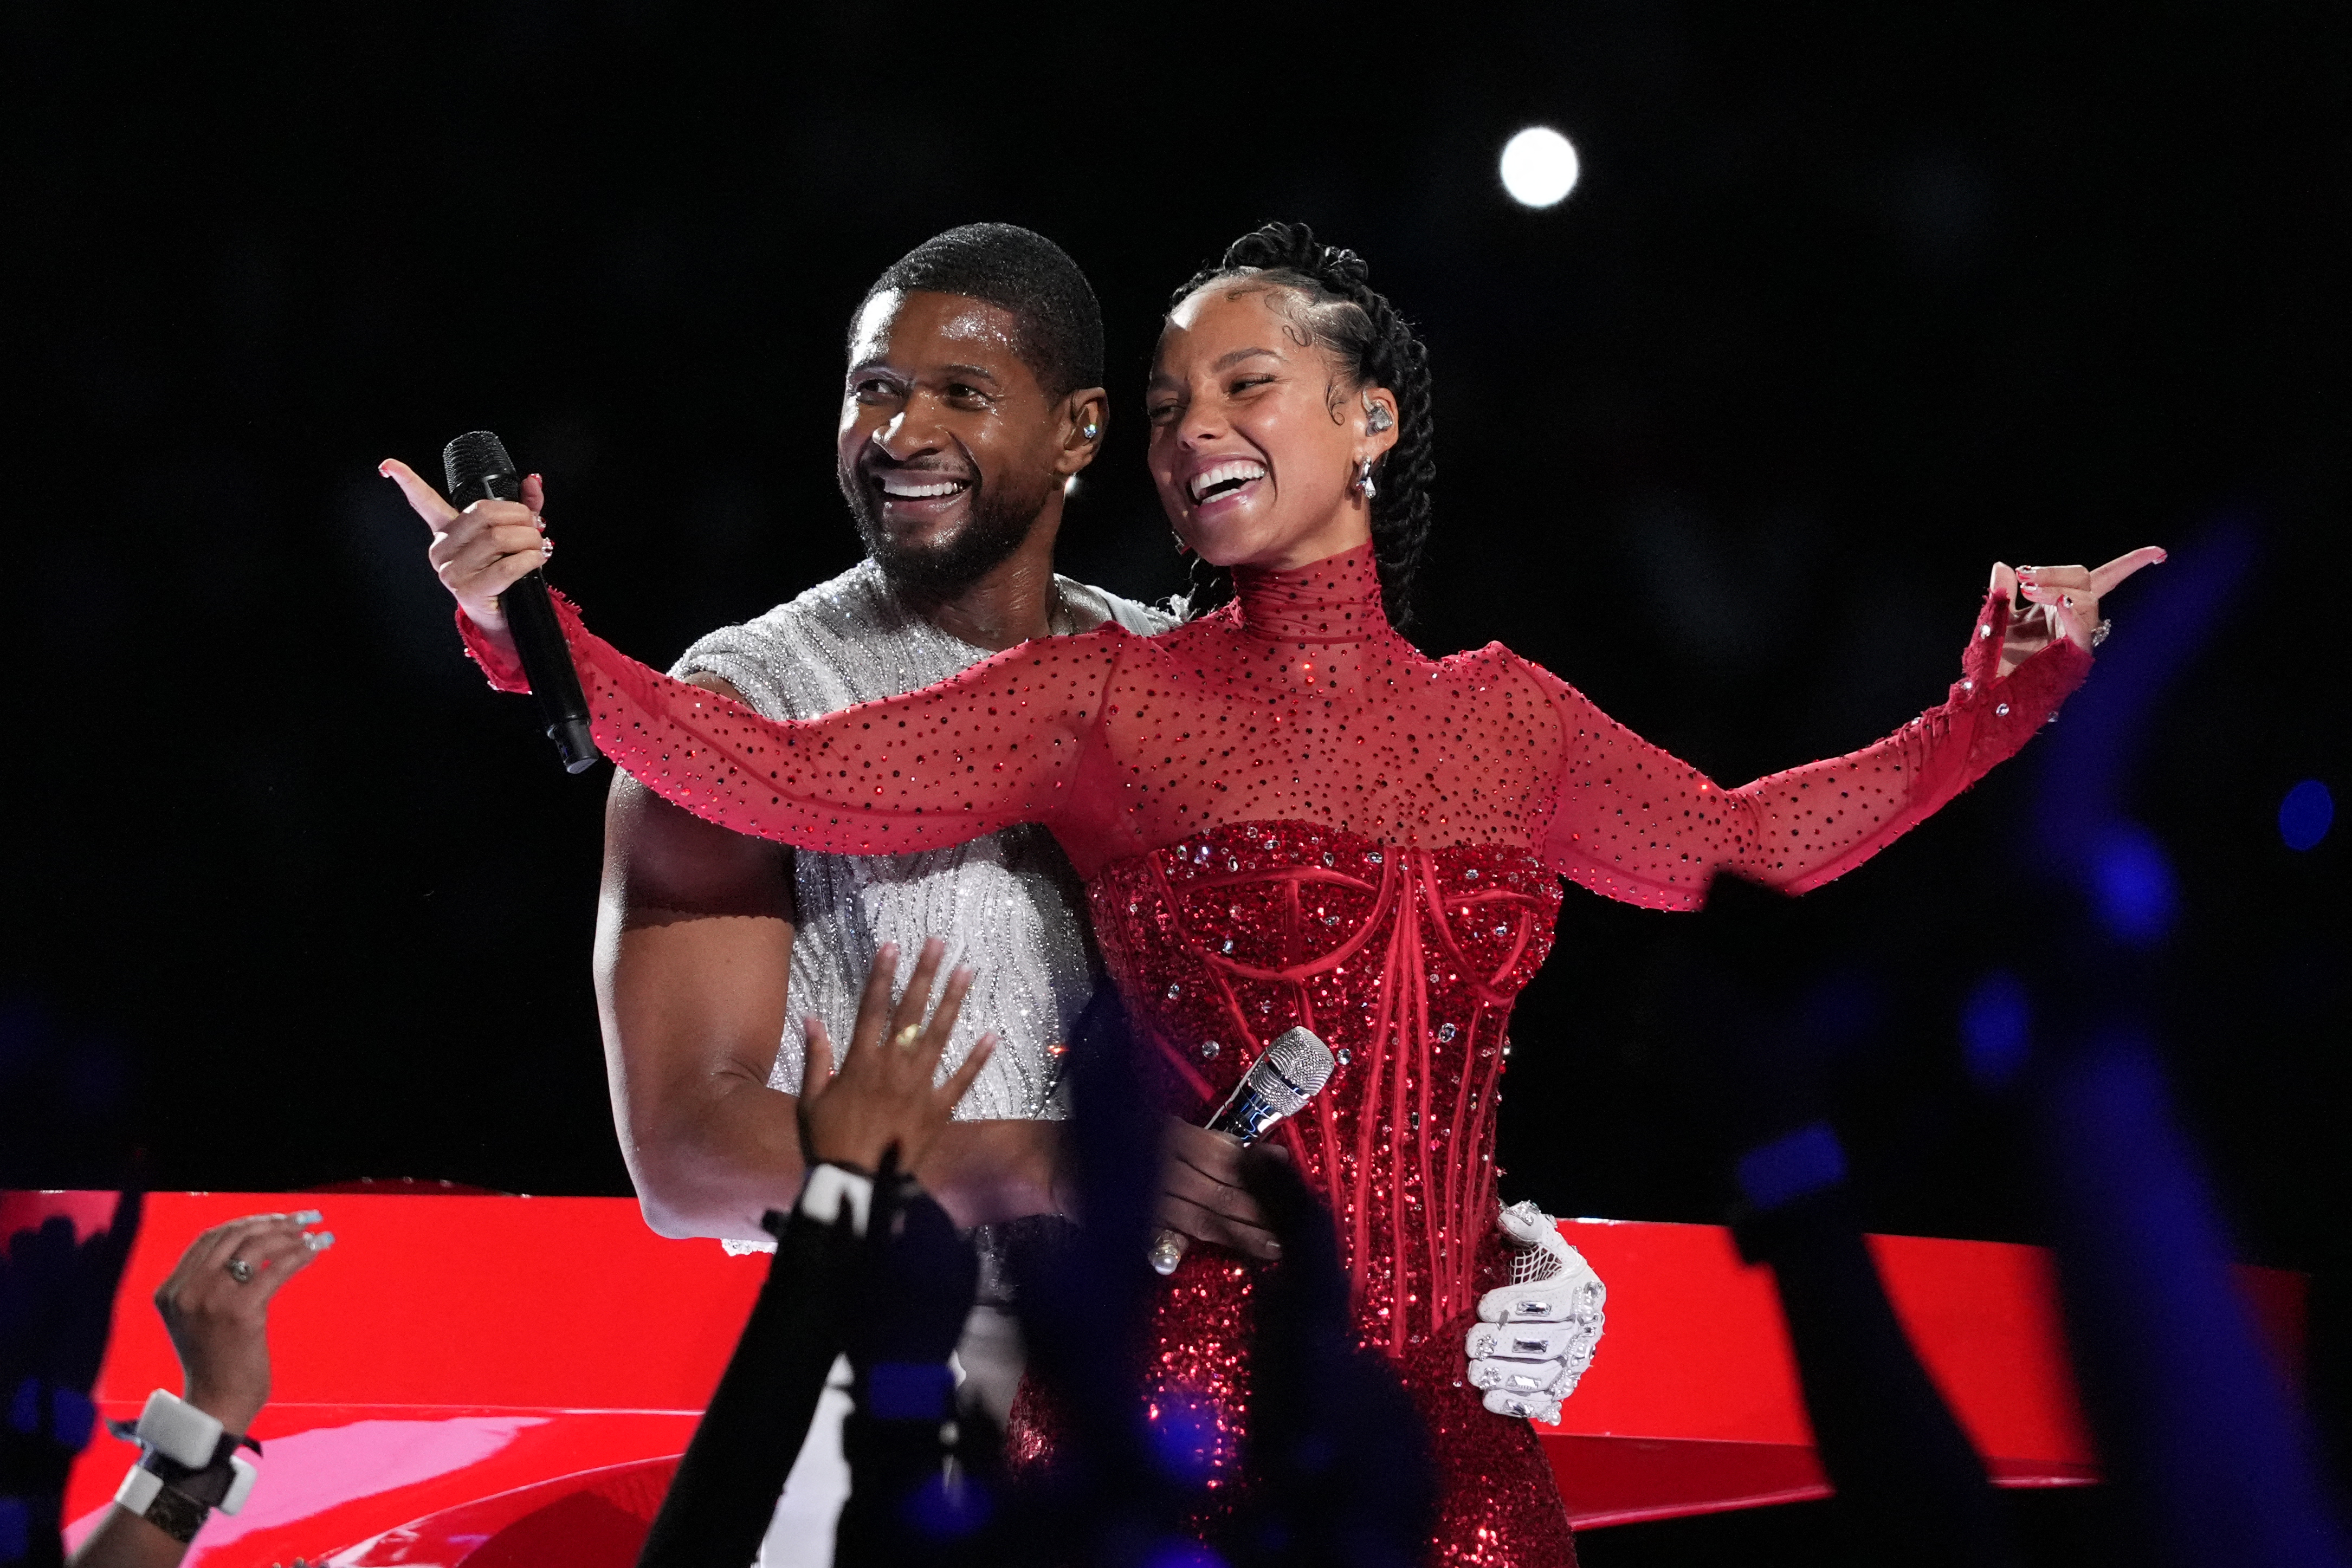 Usher was joined on the Super stage by friends like Alicia Keys